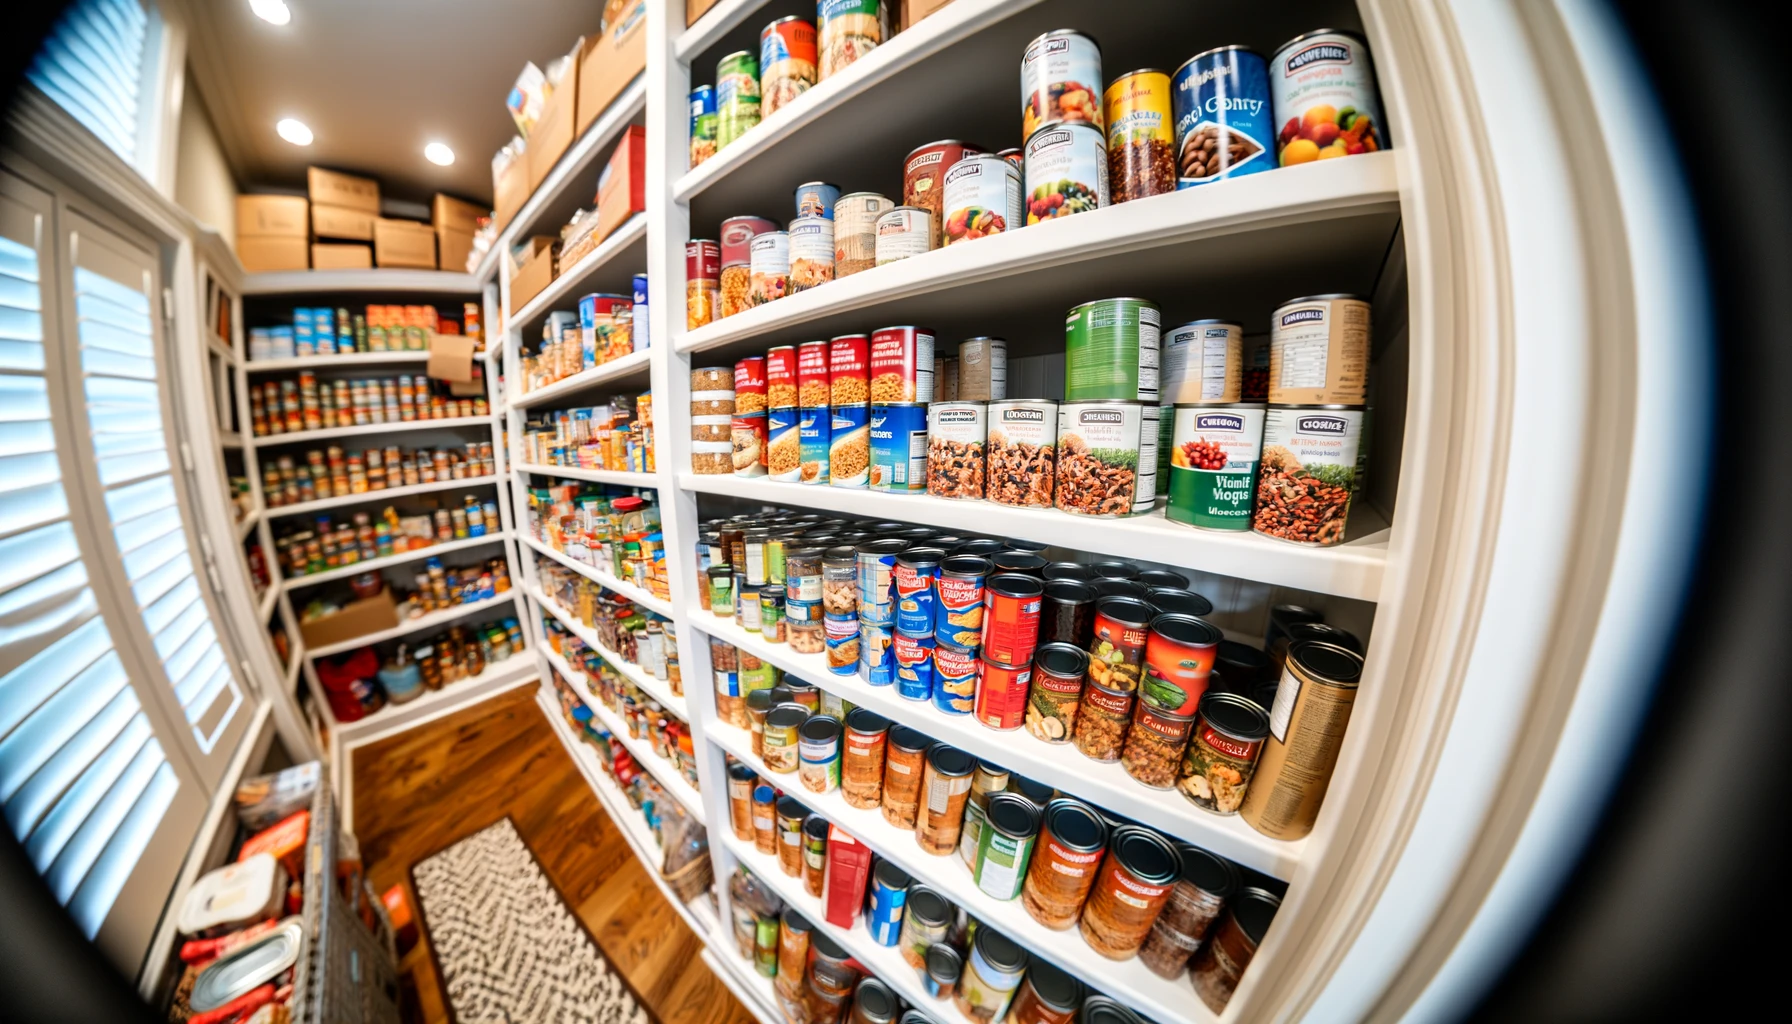 Well-organized pantry shelves with various canned goods.